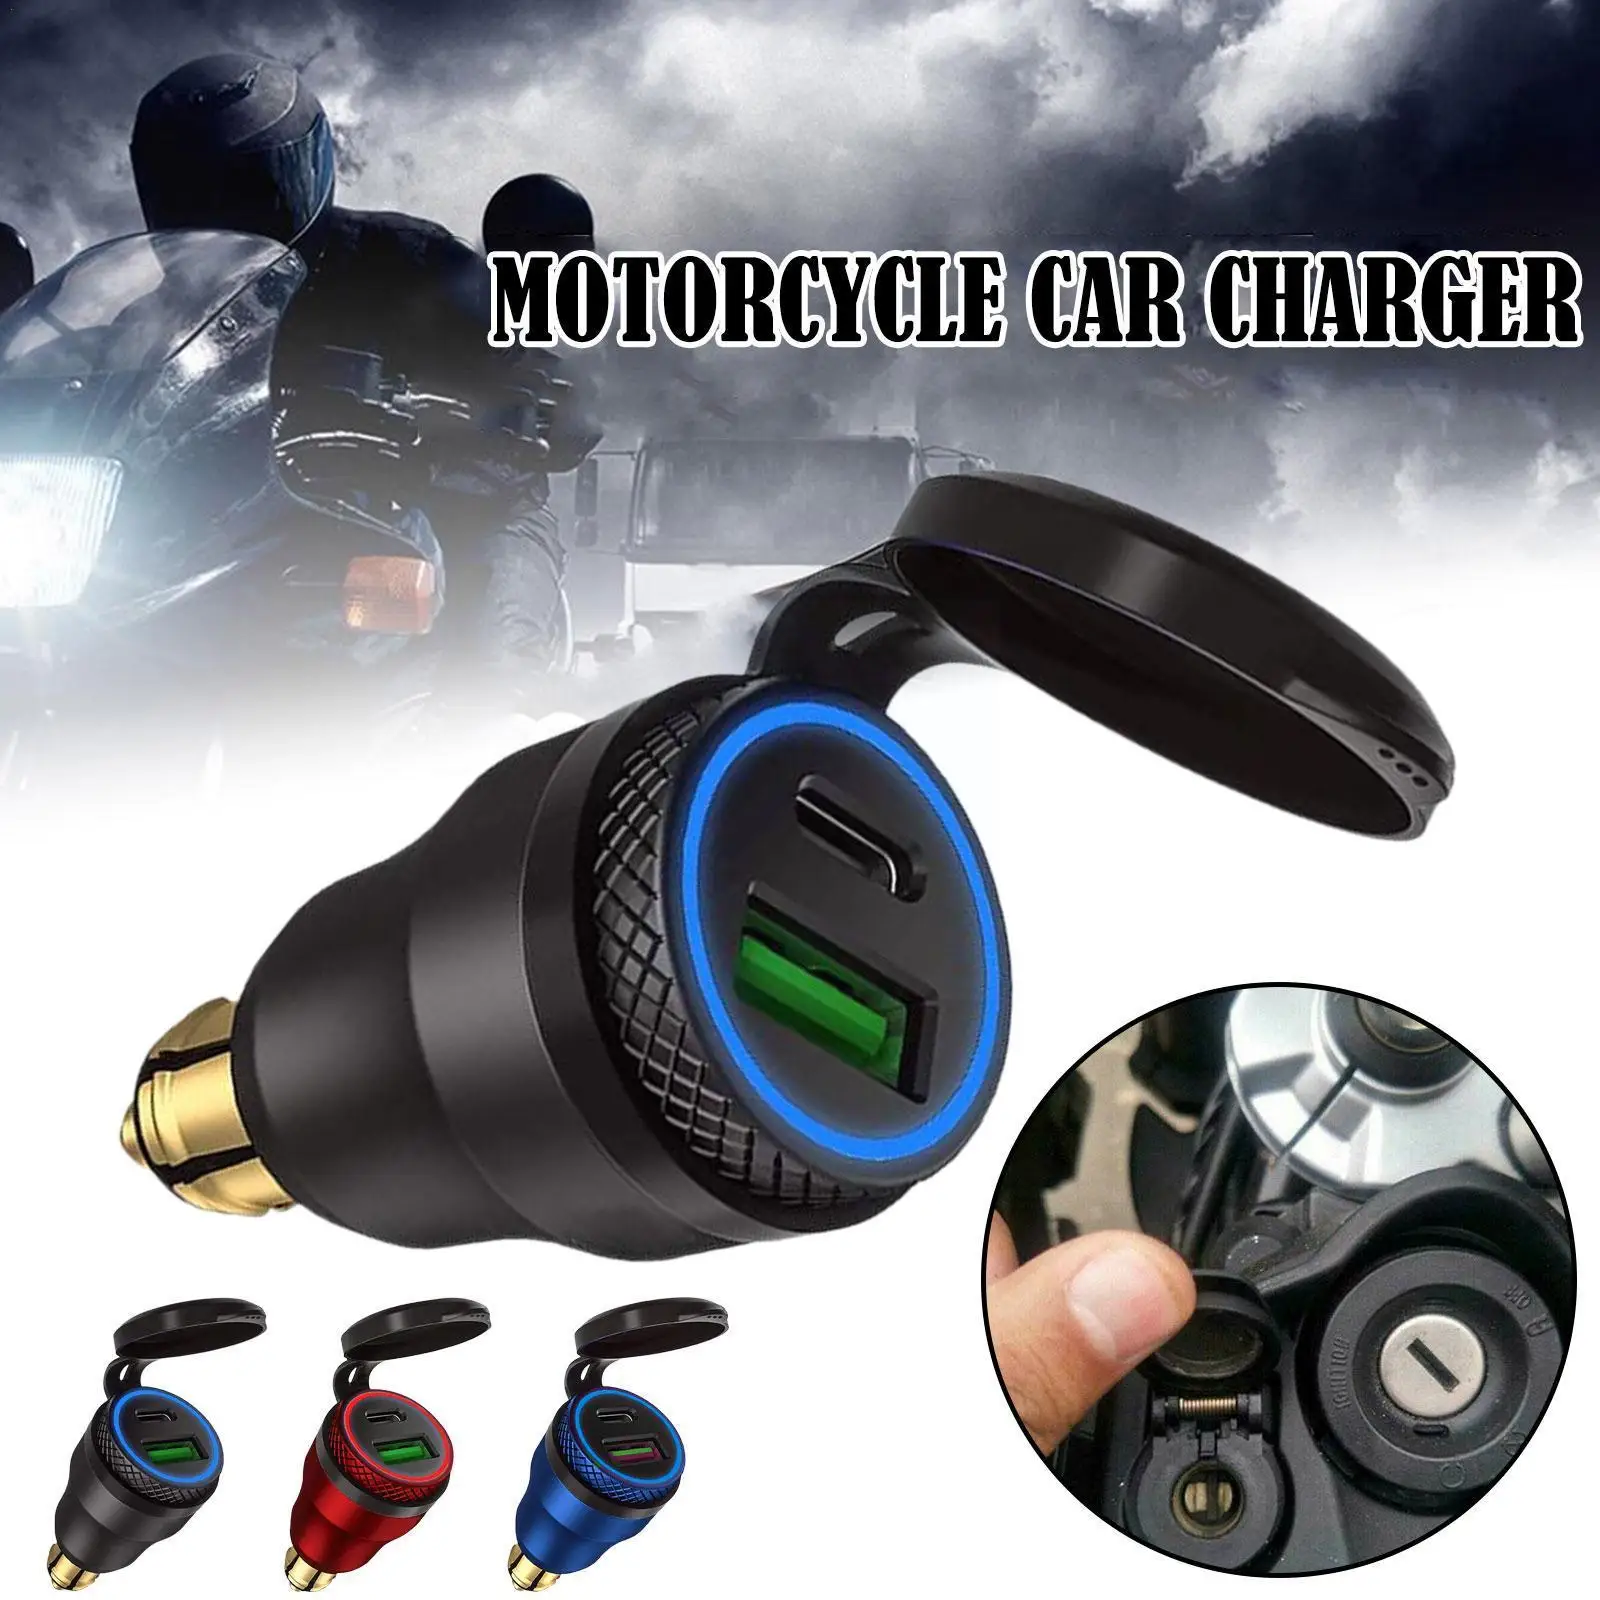 

30W QC3.0 Quick Charge Type-C PD Power Delivery DIN Socket USB Powerlet Plug DIN Charger for BMW Motorcycle Tiger Ducati A9W4